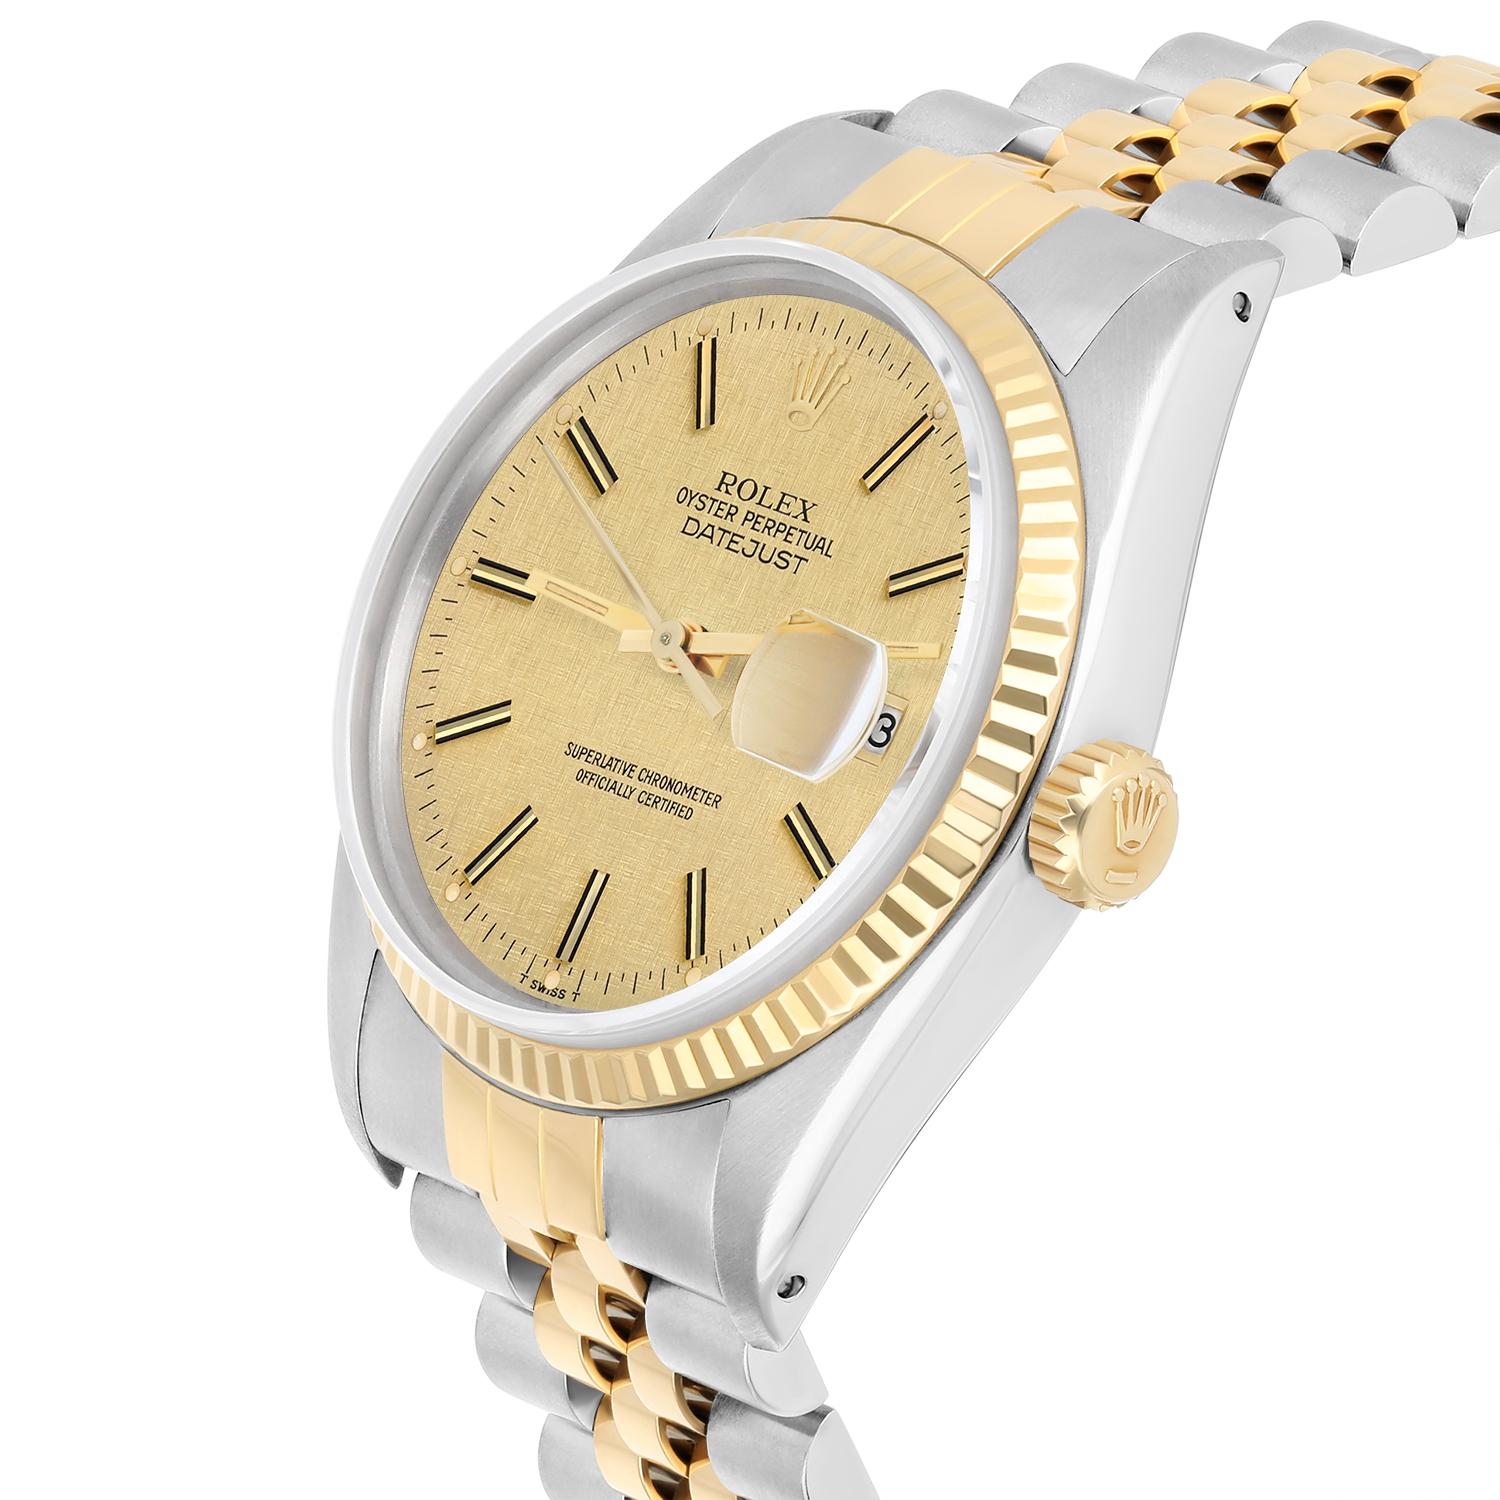 Rolex Datejust 36mm Two Tone Champagne Linen Dial Jubilee 16013 Circa 1986 For Sale 1